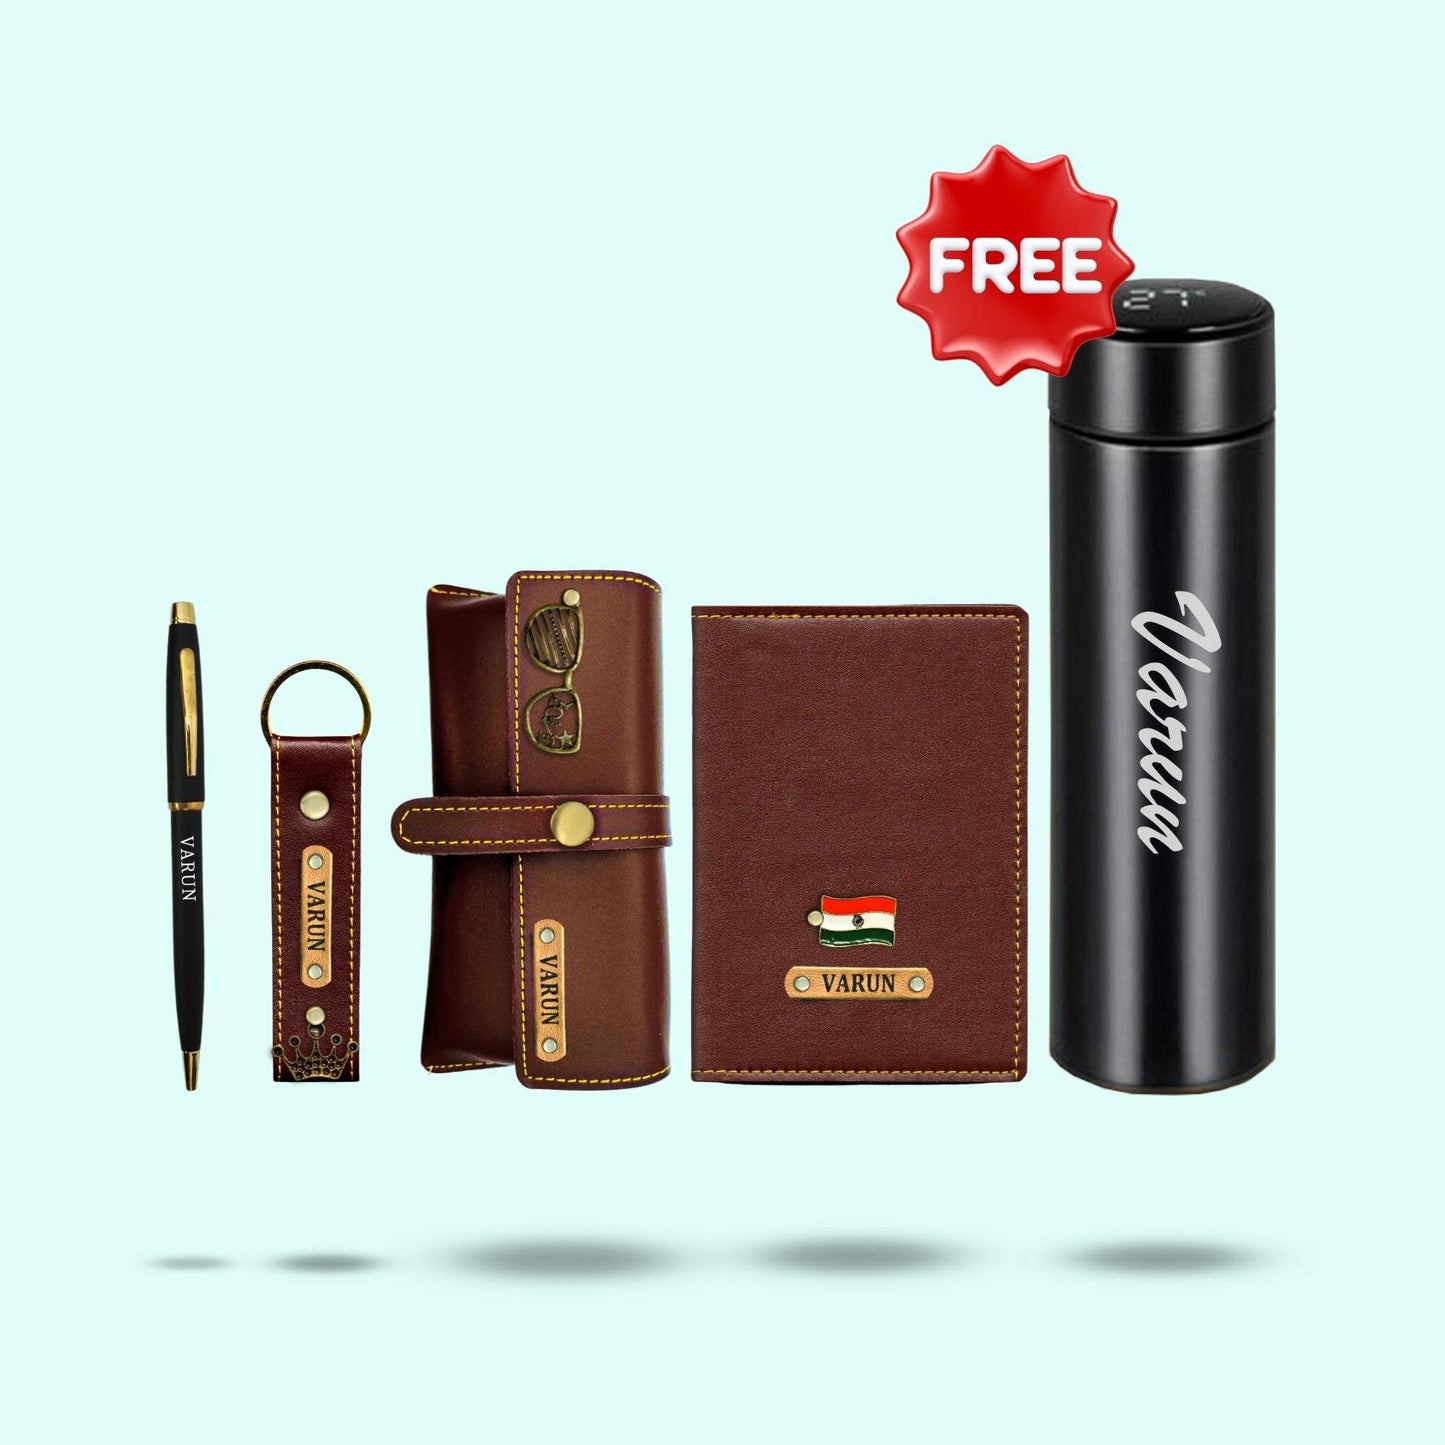 Personalized 5-in-1 Gift Set For Men and Women - Includes 1 Free Temperature Bottle